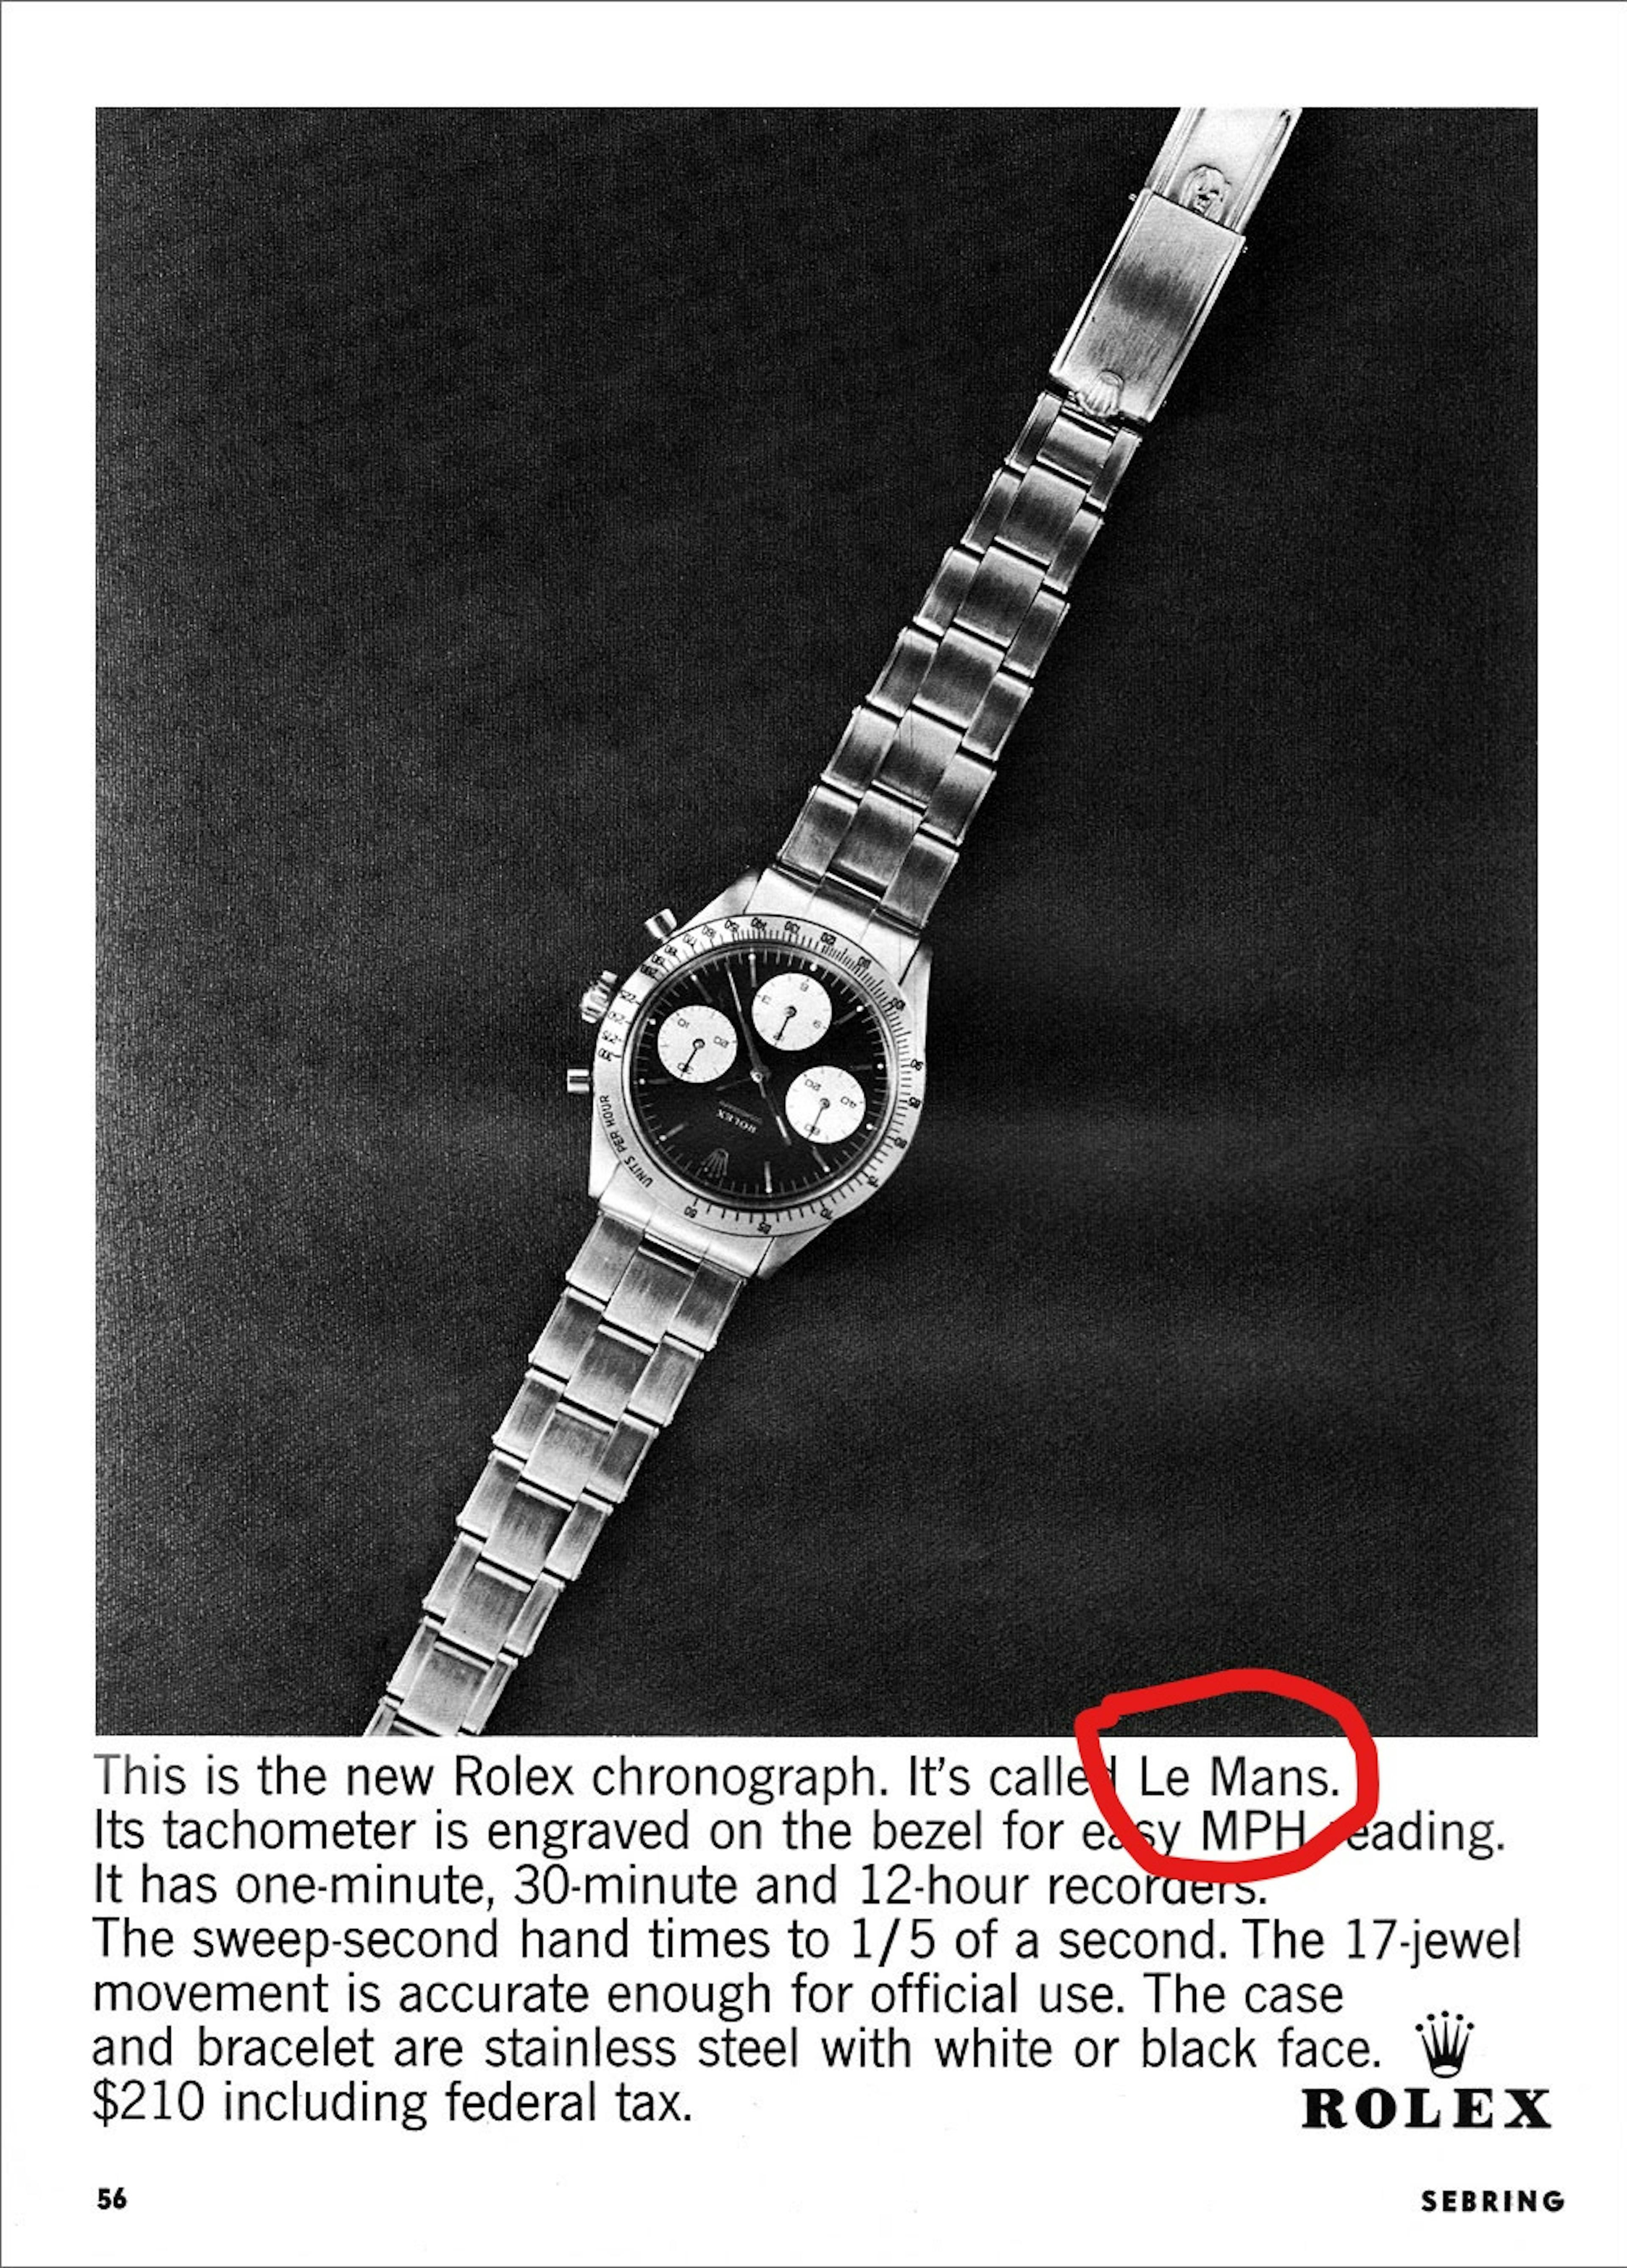 The only known Rolex ad using the name "Le Mans", courtesy of www.rolexmagazine.com